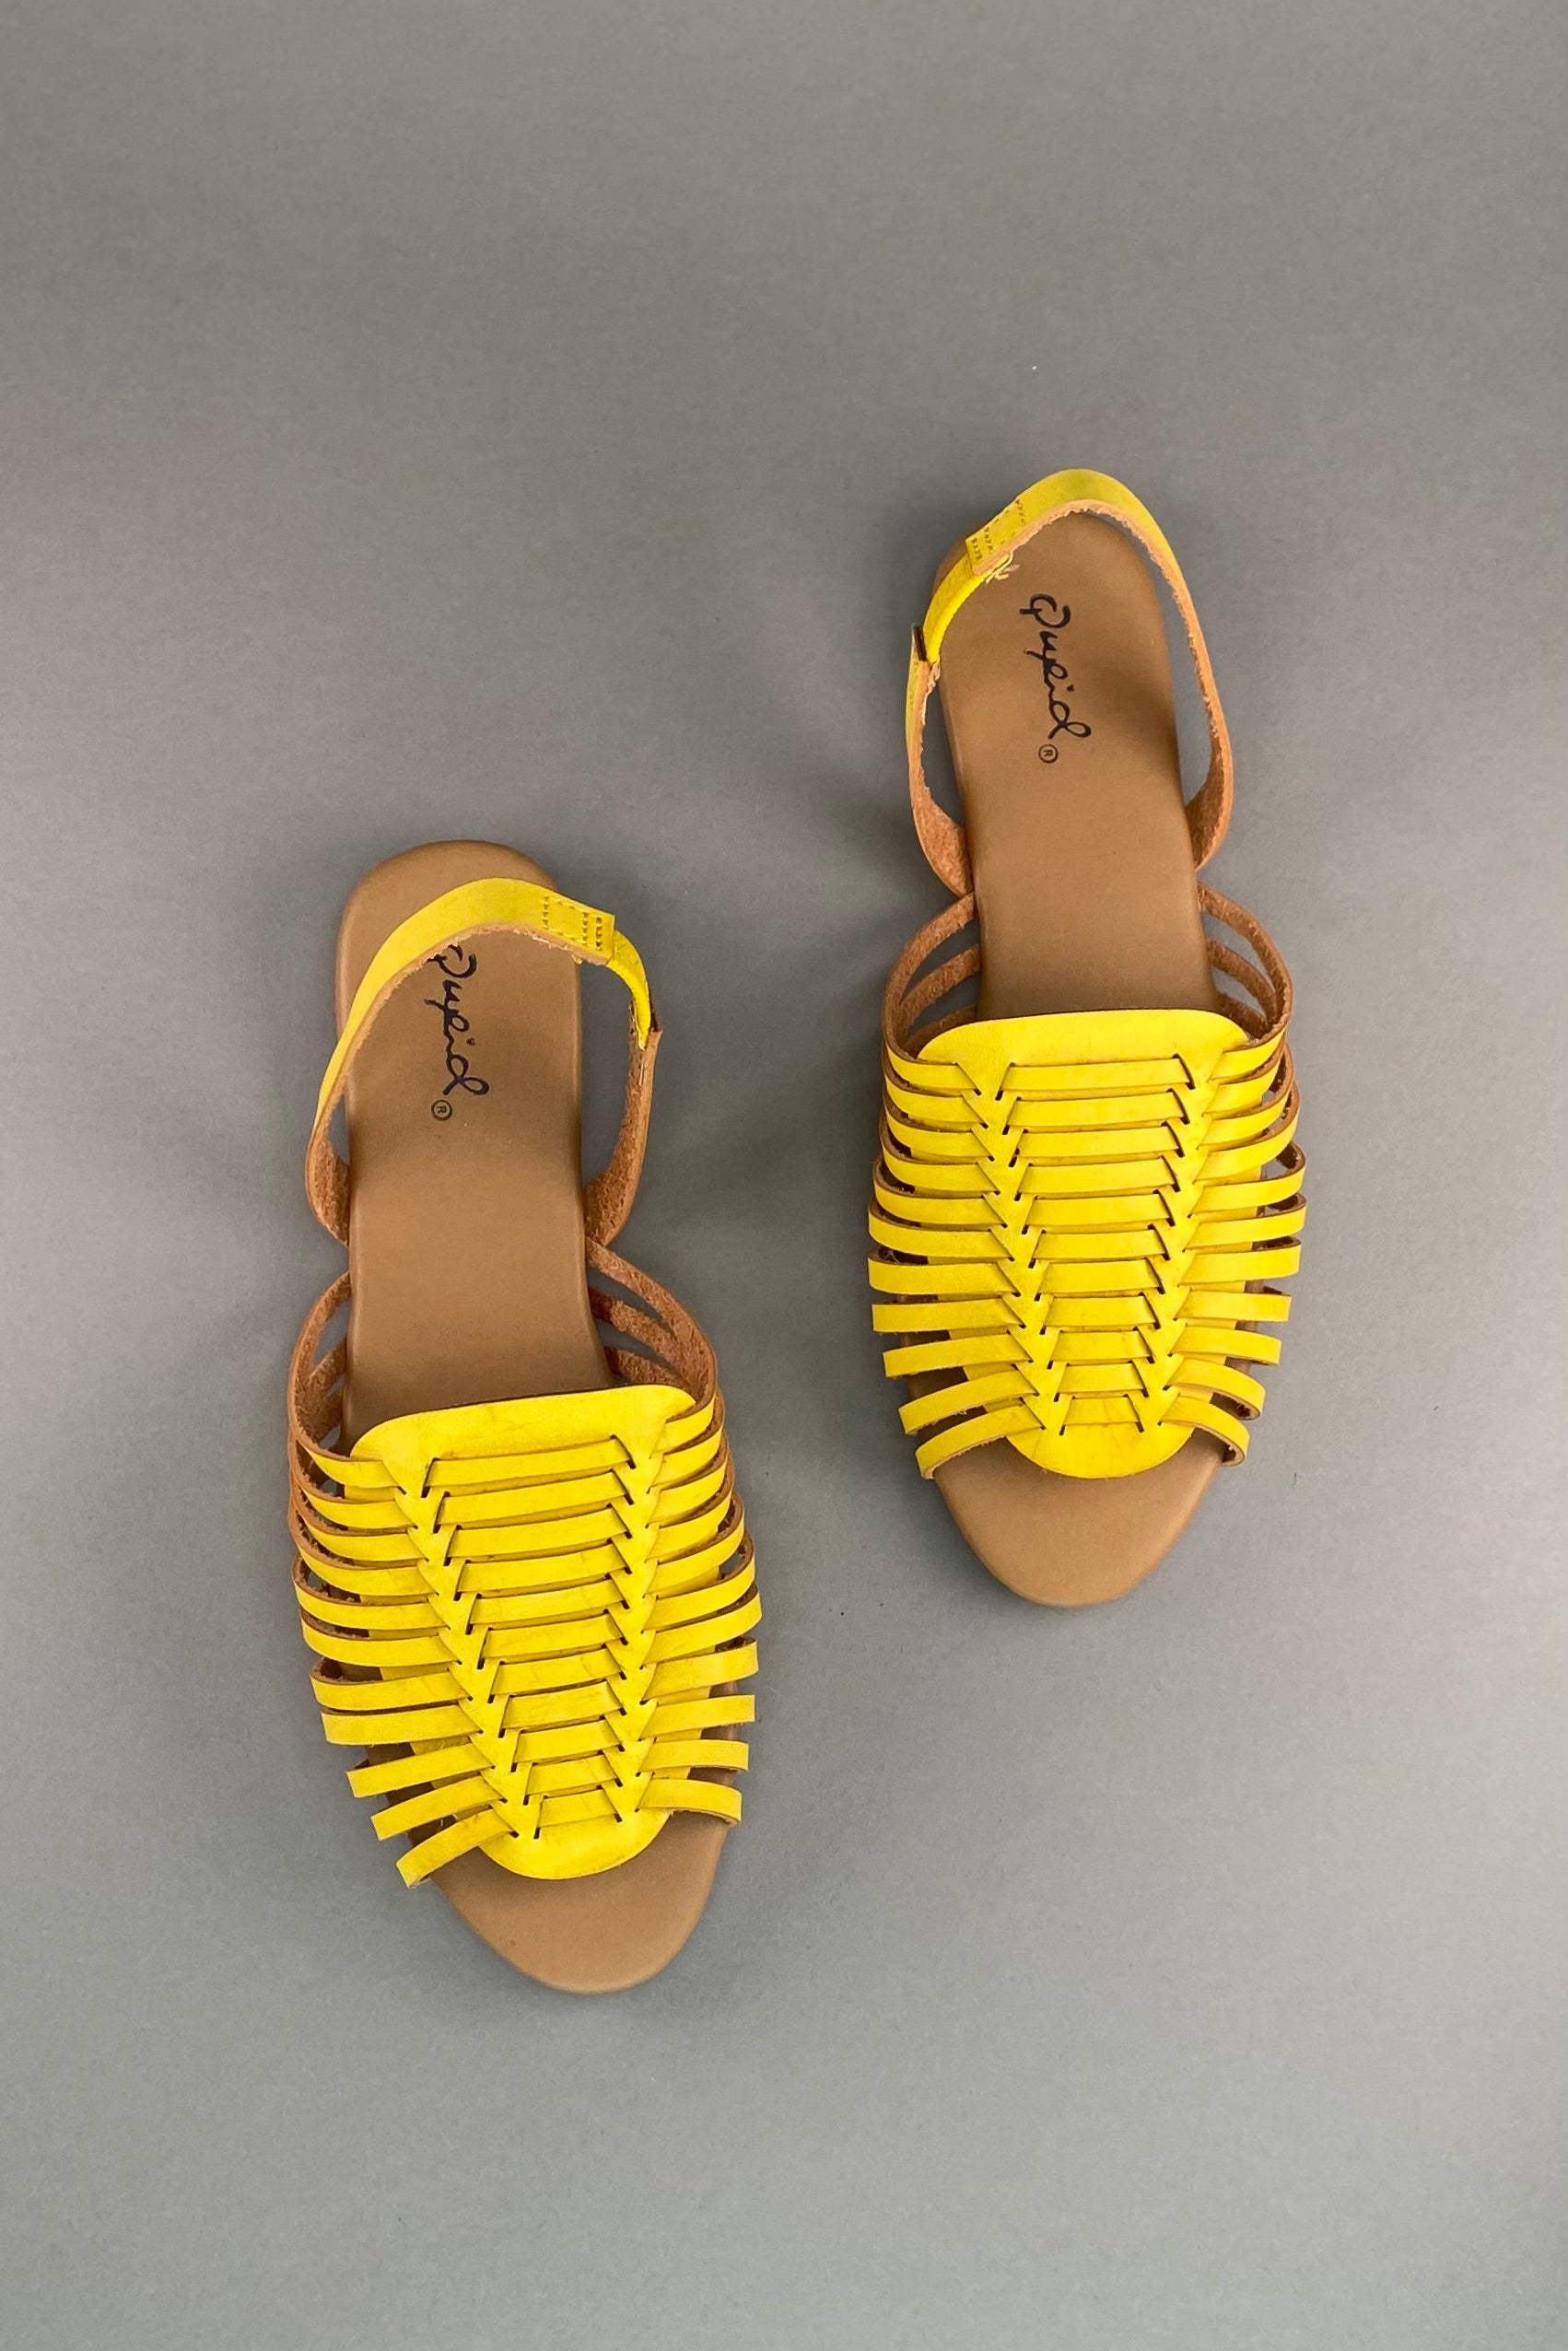 Seychelles Yellow Platform Sandals 9.5 | Nuuly Thrift